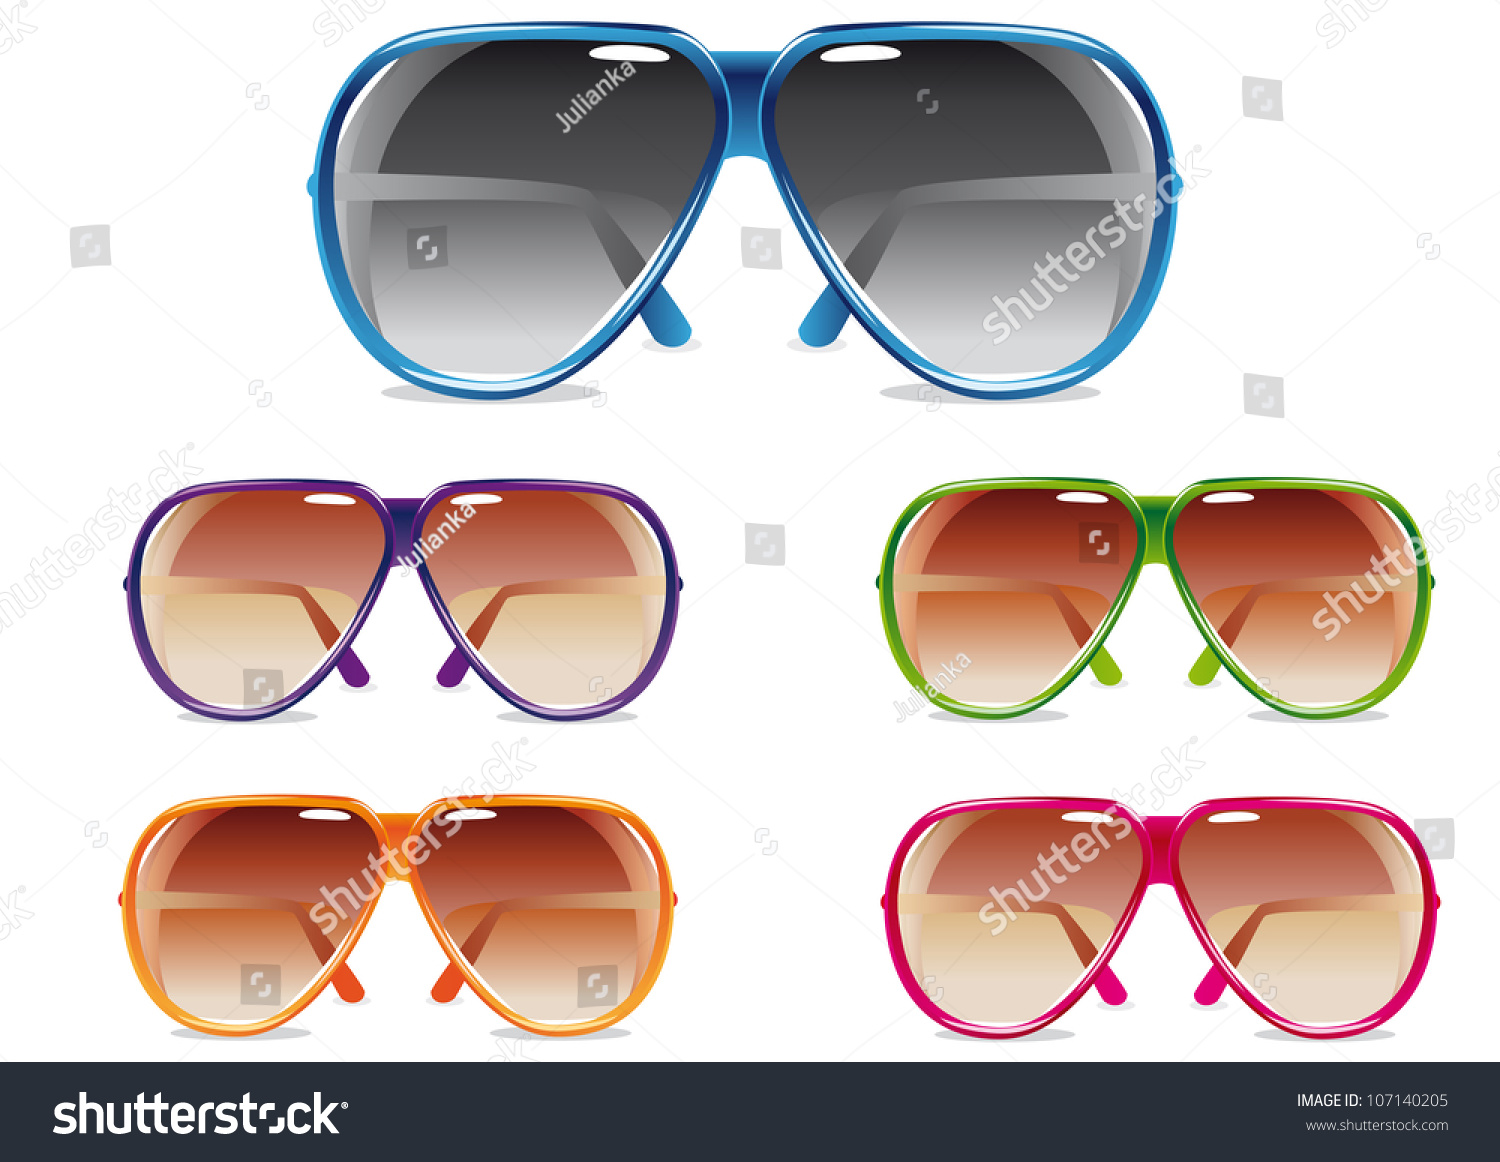 Illustration Of A Set Of Sunglasses In Different Colors - 107140205 ...